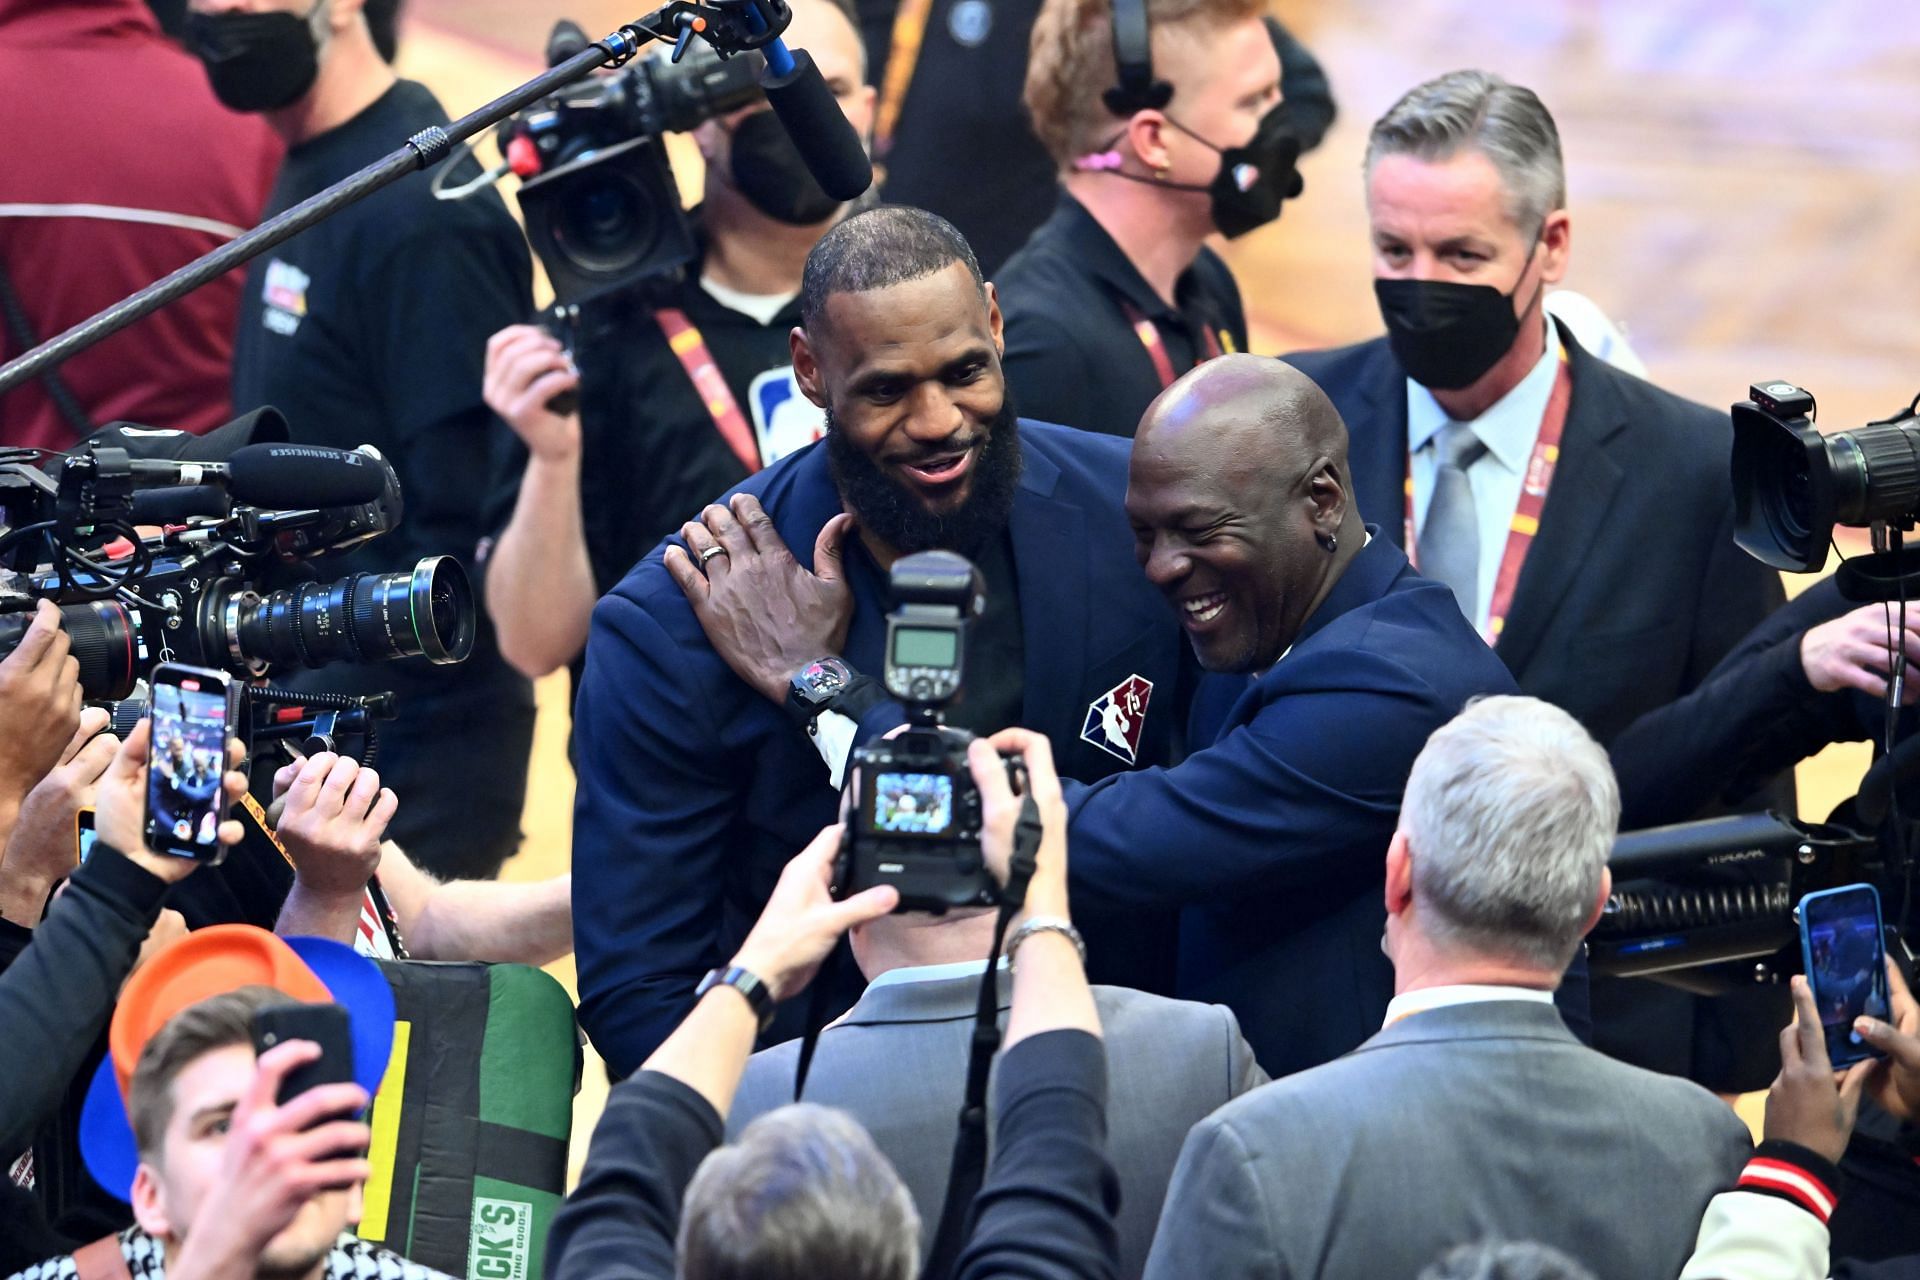 LeBron James and Michael Jordan during the All-Star Weekend MJ and King James embracing each other